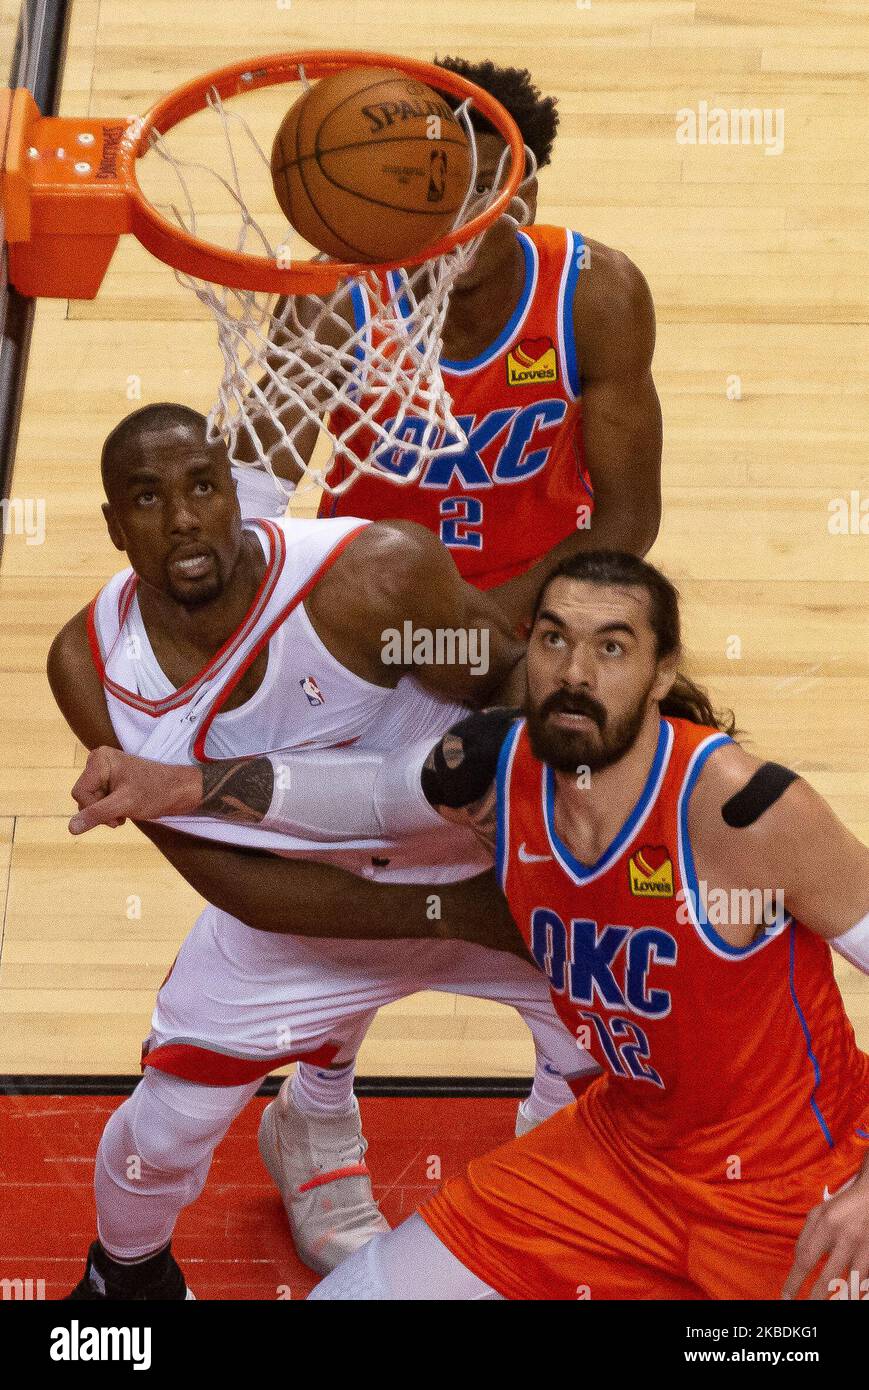 Steven Adams #12 of the Oklahoma City Thunder and Serge Ibaka #9 of the Toronto Raptors look at the ball under the basket during the Toronto Raptors vs Oklahoma City Thunder NBA regular season game at Scotiabank Arena on December 29, 2019, in Toronto, Canada (Oklahoma City Thunder won 98:97) (Photo by Anatoliy Cherkasov/NurPhoto) Stock Photo